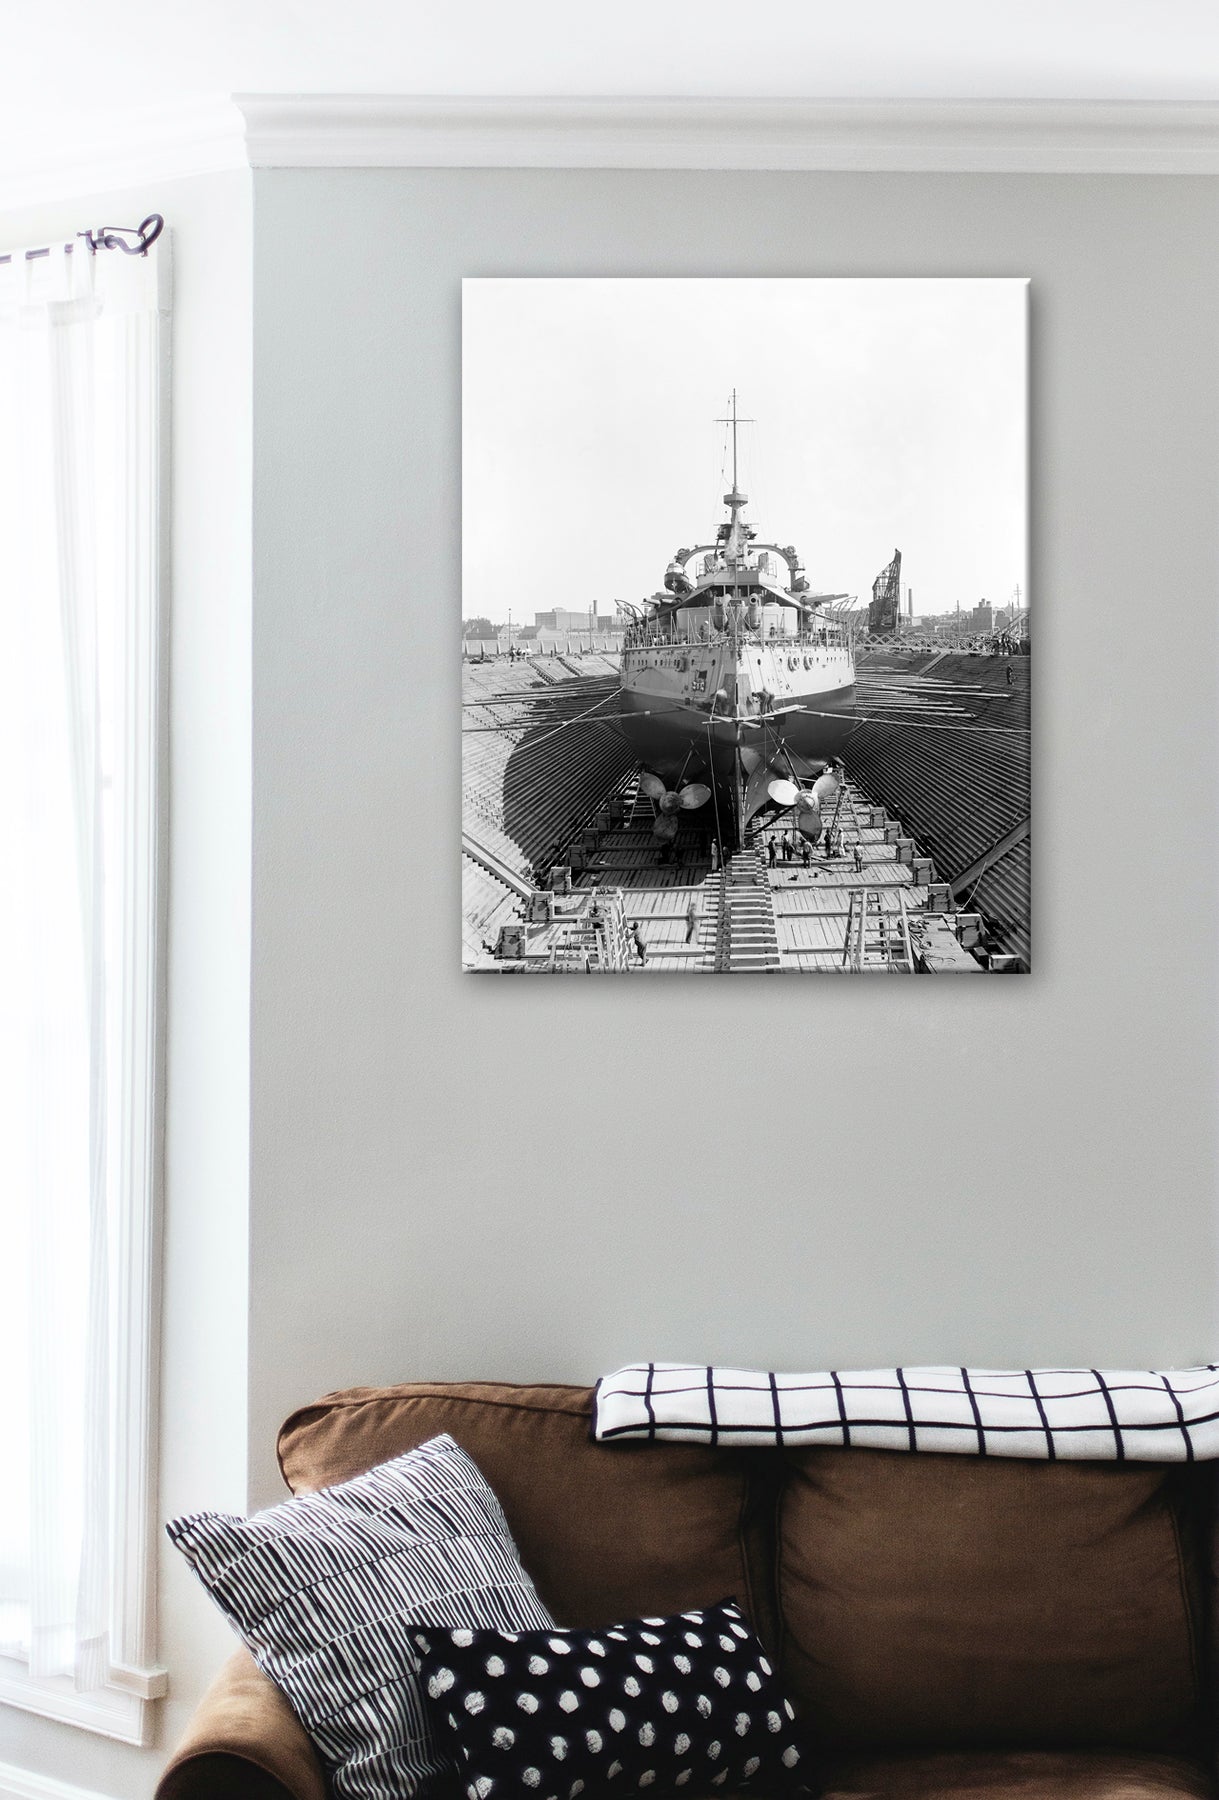 A canvas print of the USS Oregon in Dry Dock hanging above a brown couch